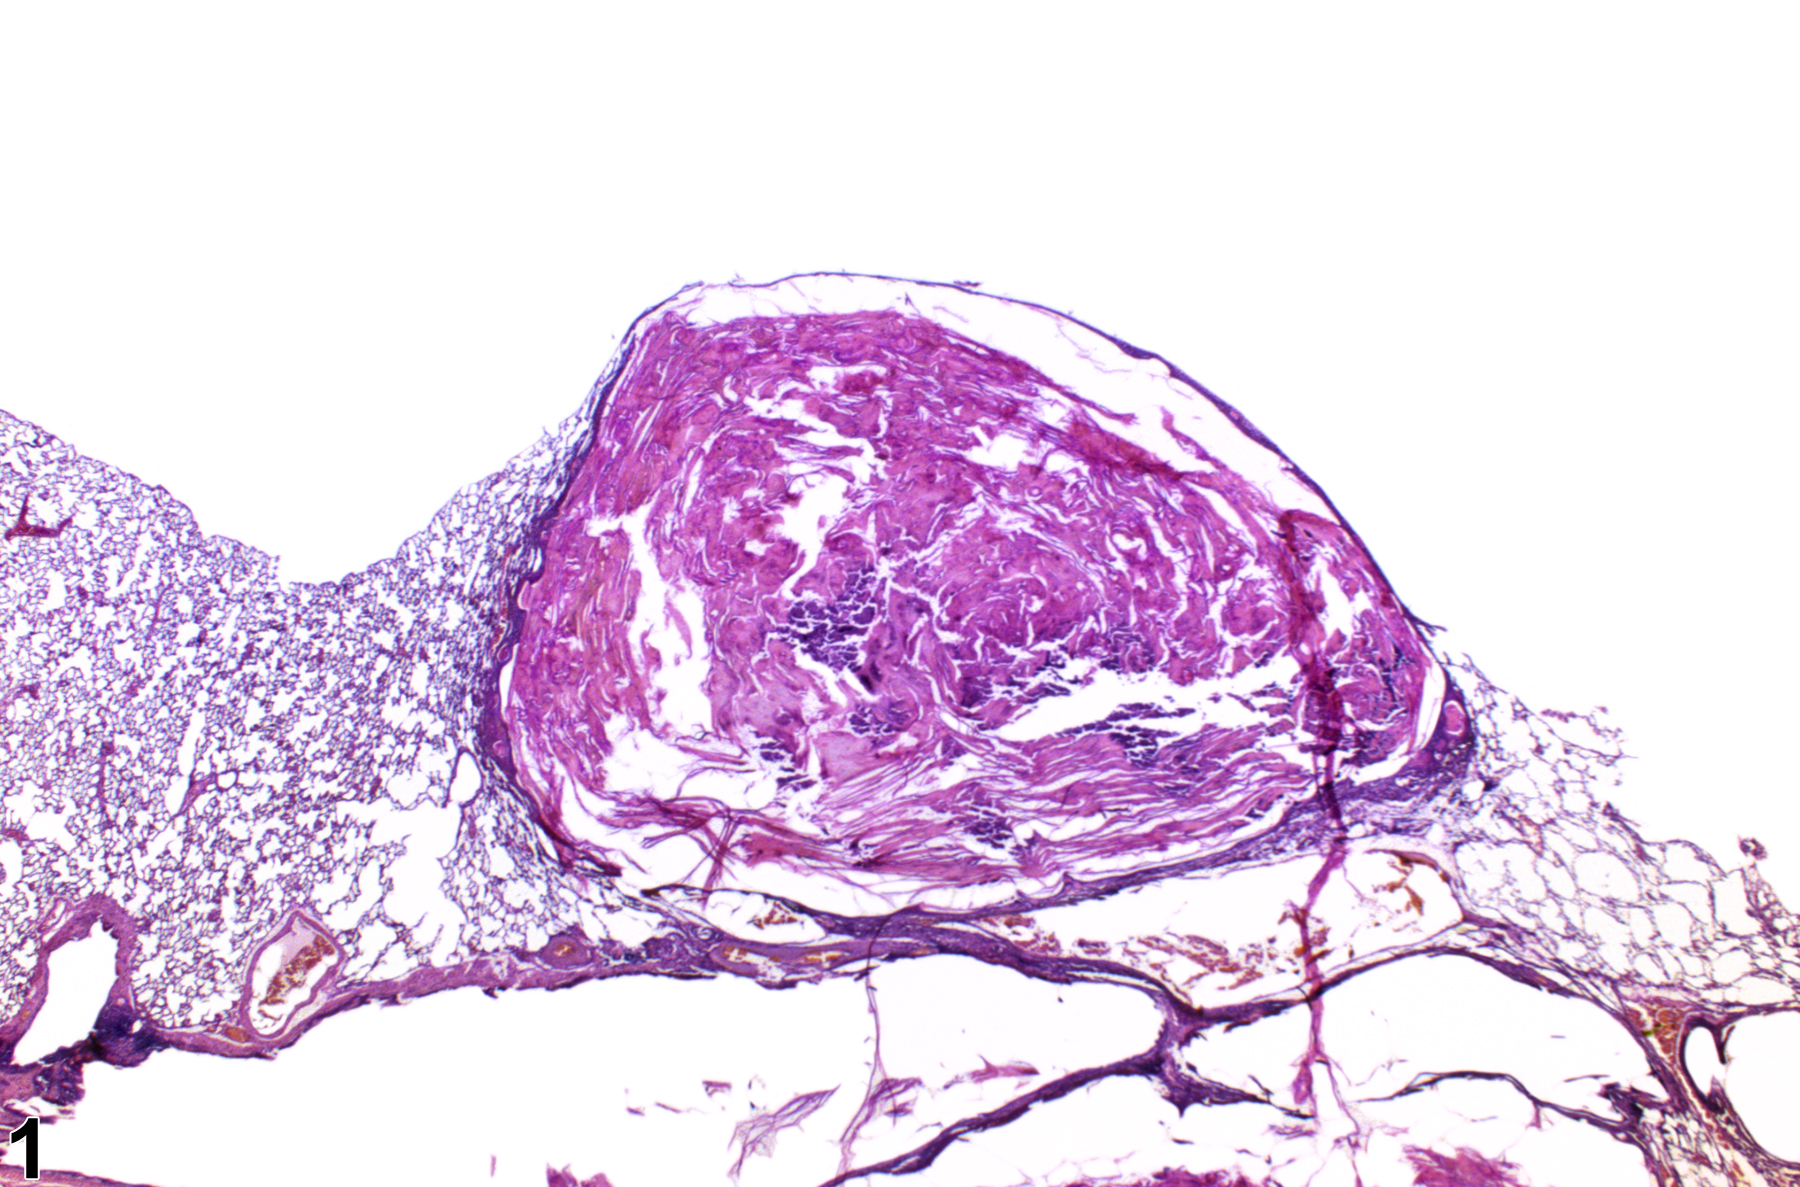 Image of keratinizing cyst in the lung from a male F344/N rat in a chronic study